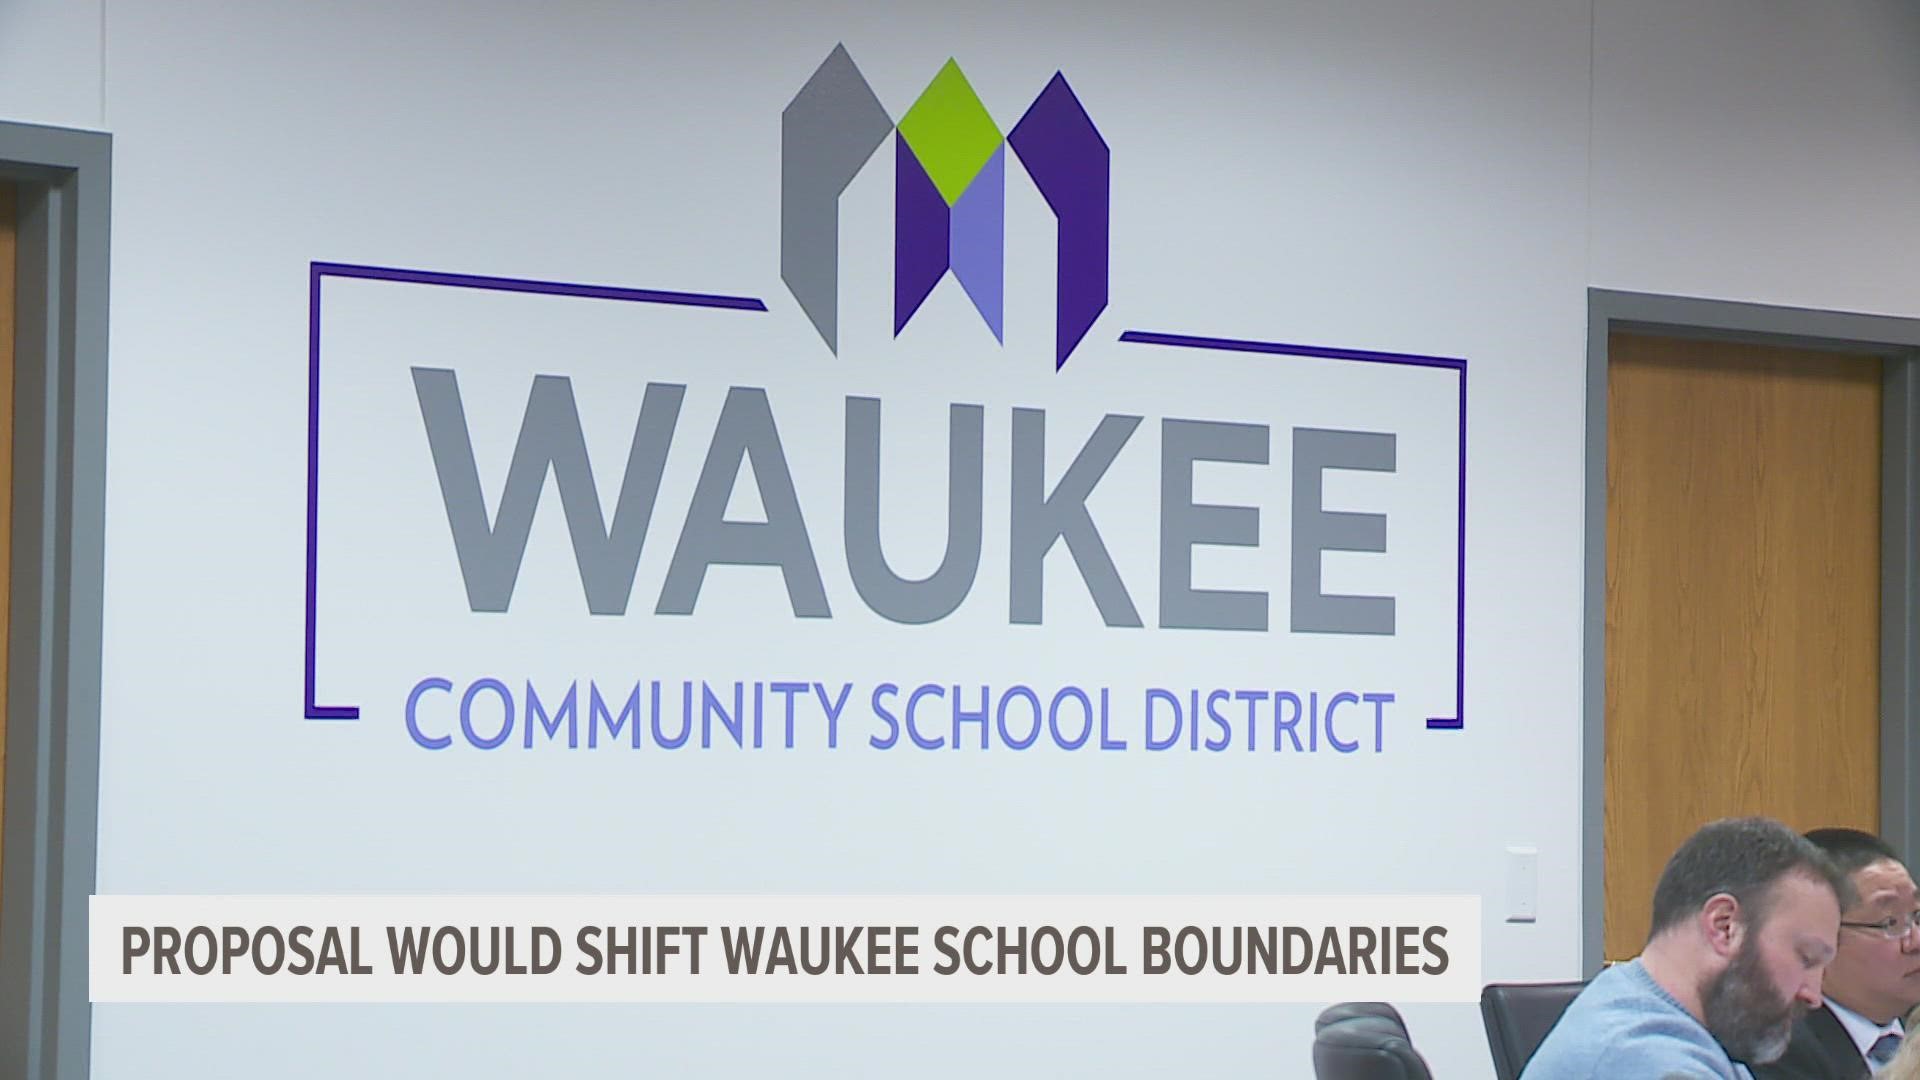 Some parents in Waukee are upset about a proposal that would shift some school boundaries.